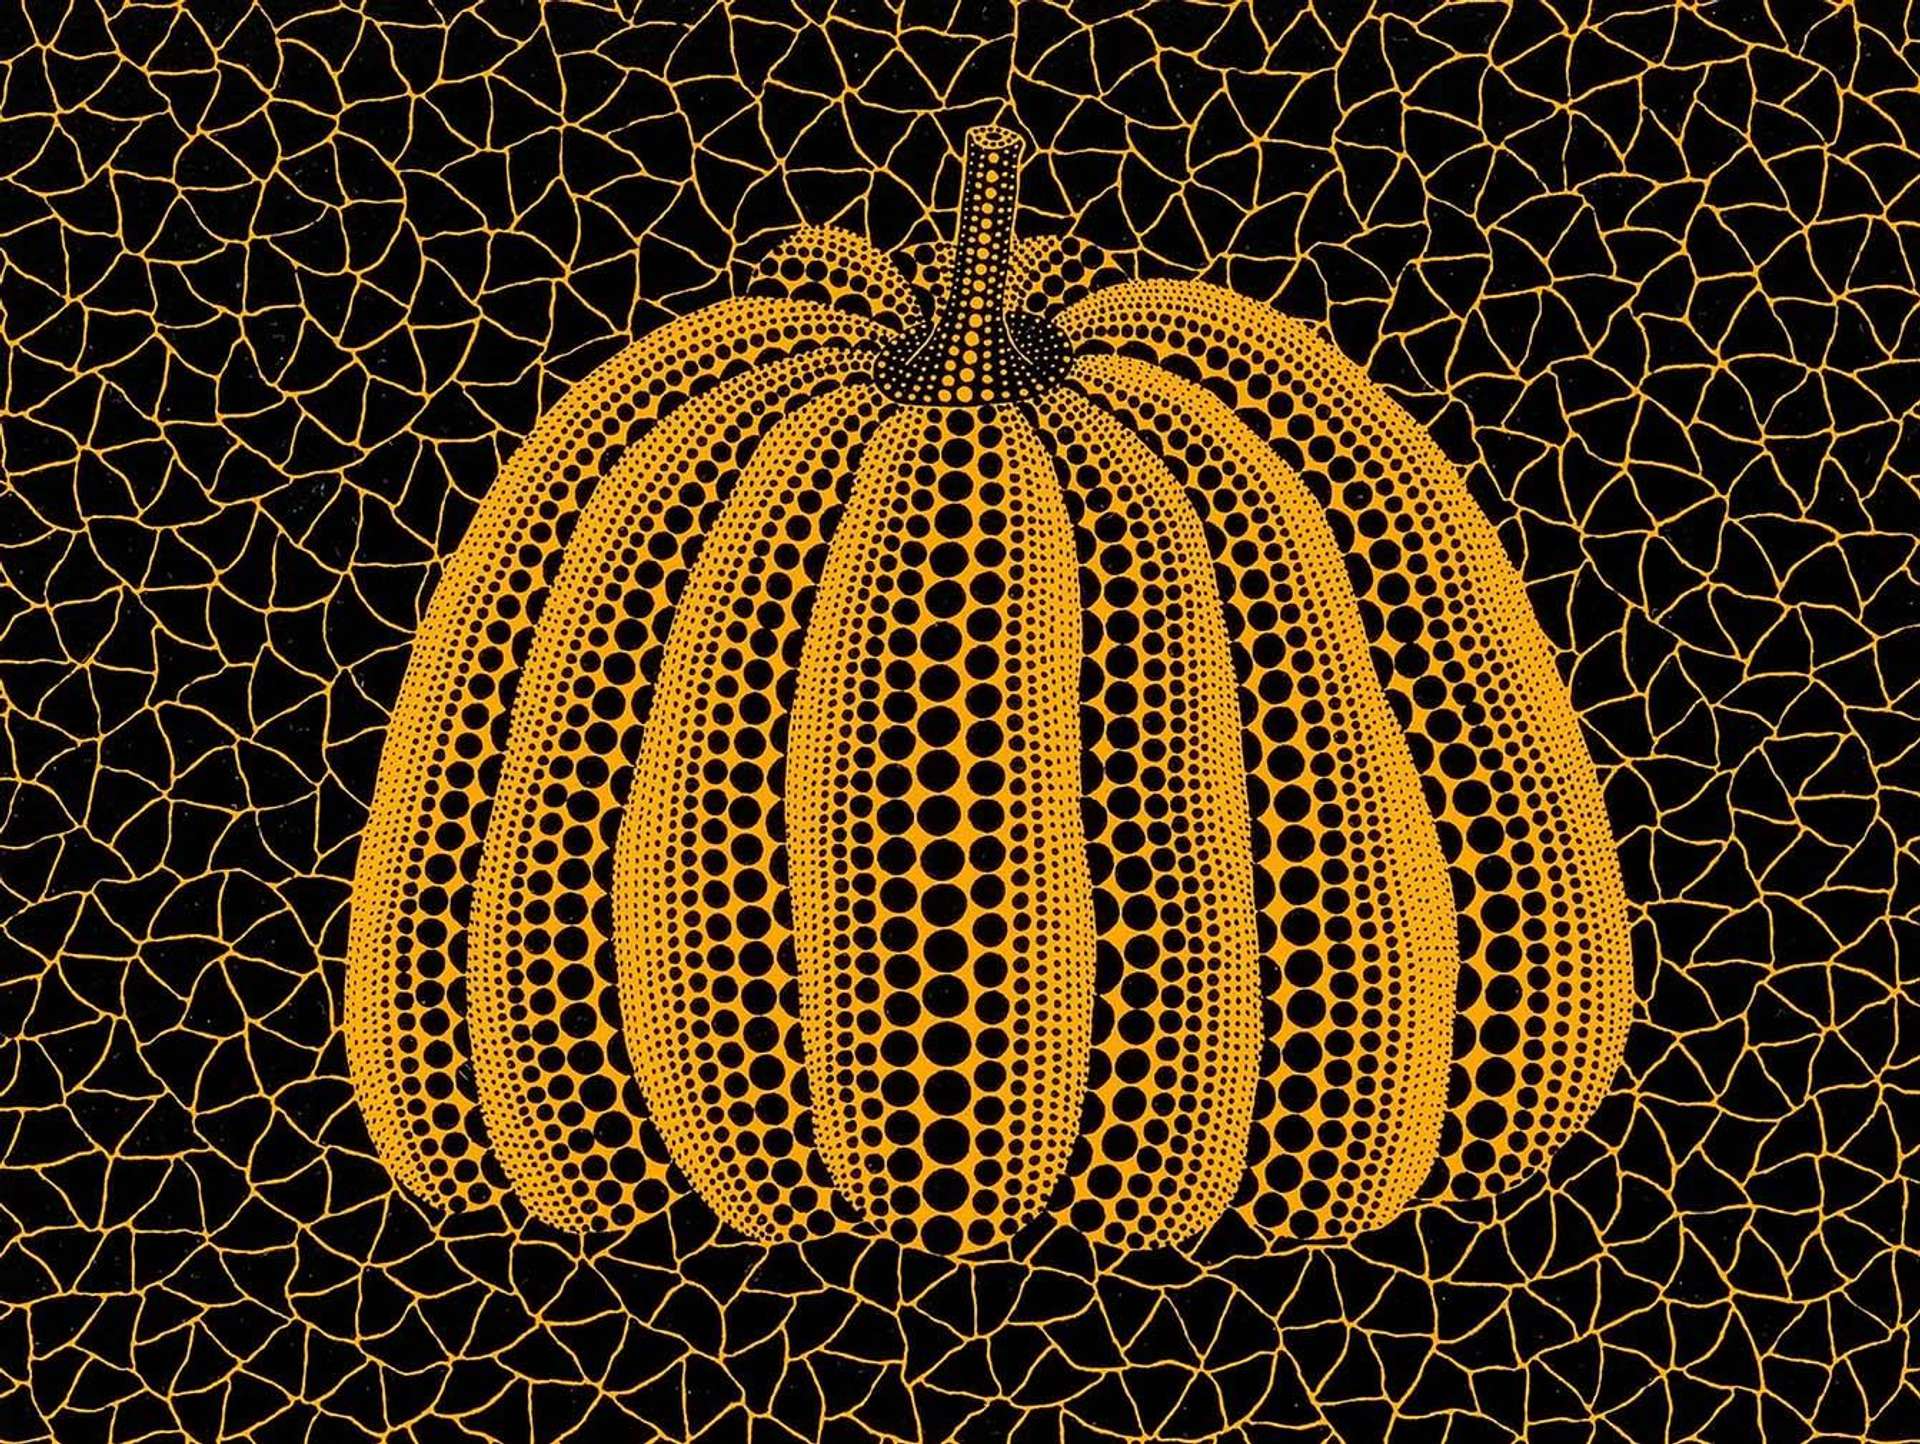 A graphic yellow pumpkin with black dots on a cracked black background